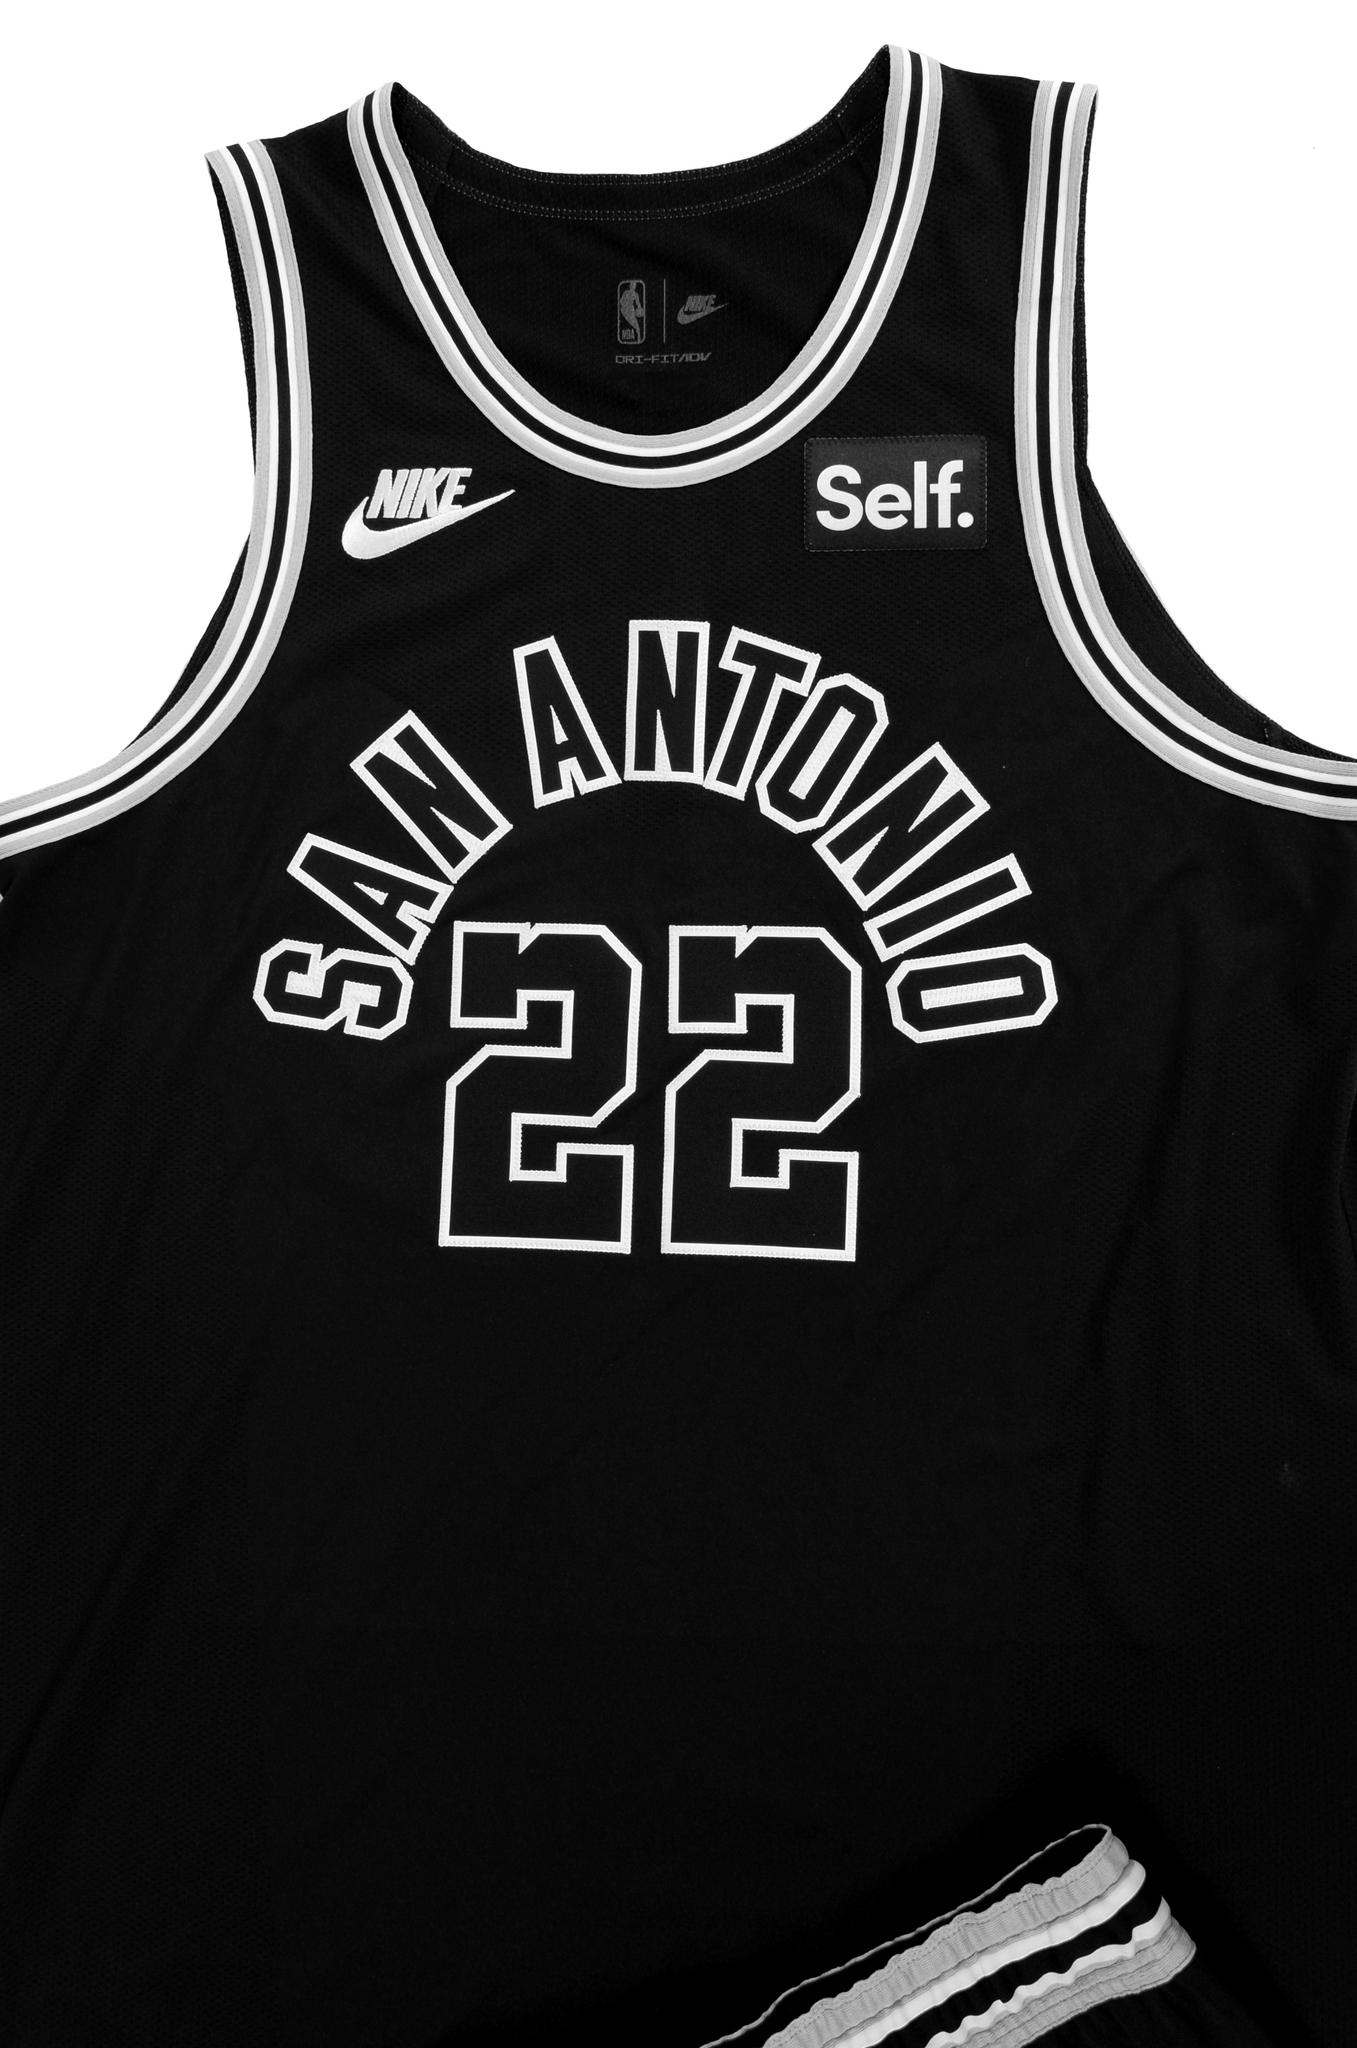 Spurs iconic black-on-black jersey unveiled for 50th anniversary